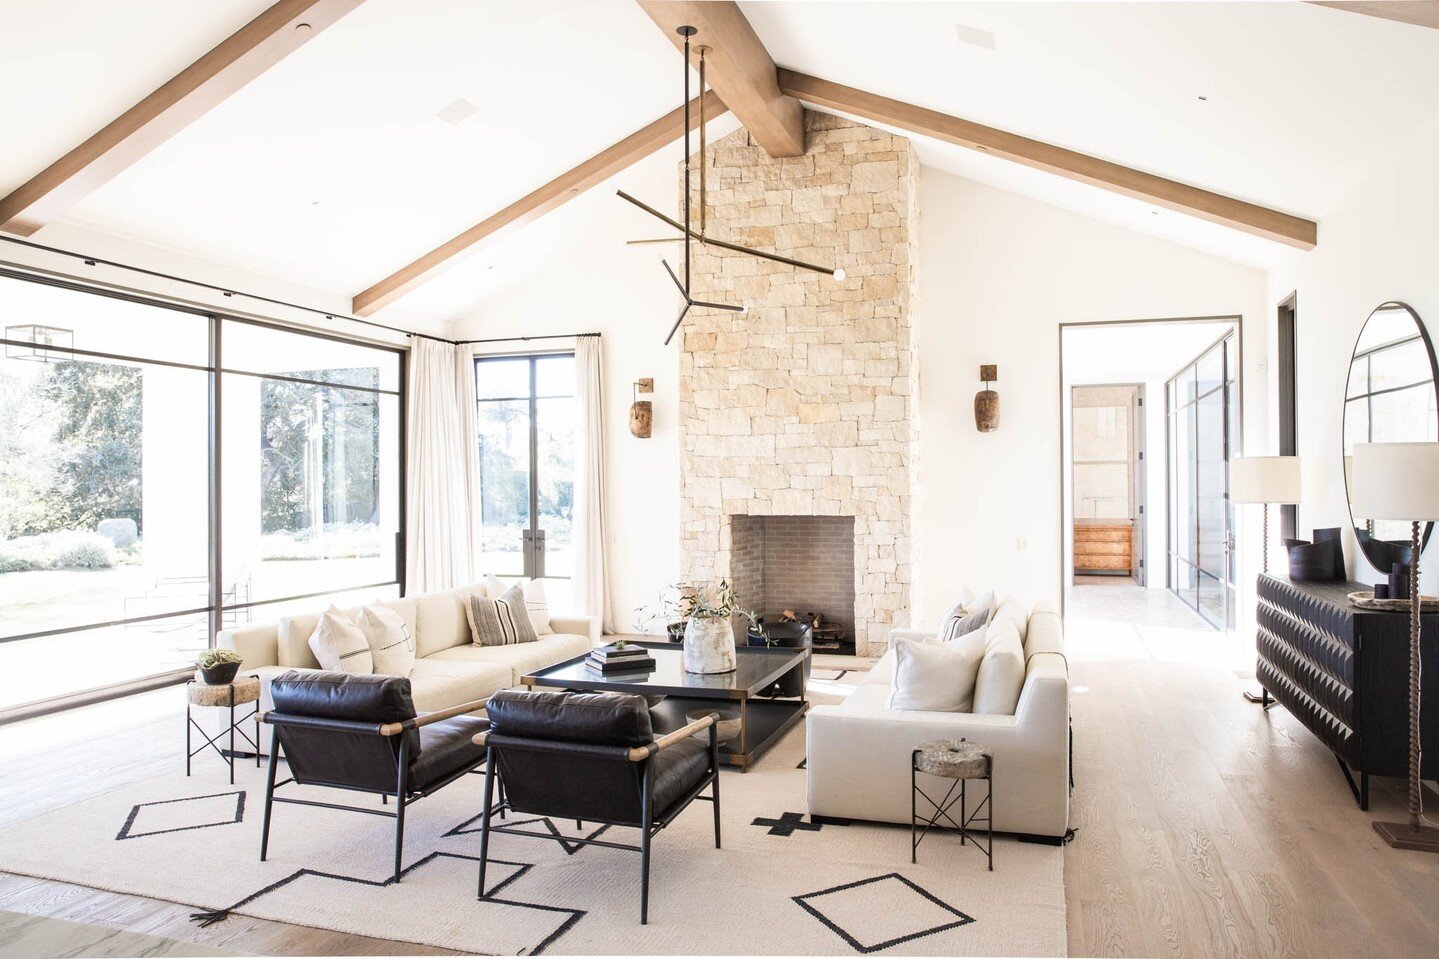 Now that's what I call 'Modern Zen.' Take a peek inside this William Hefner home in the hills of Montecito - over on our 'Project' page! ⁠
⁠
#montecito #modernzen #californialiving #californiadesigner #rusticdesign #santabarbaradesigner #interiordesi